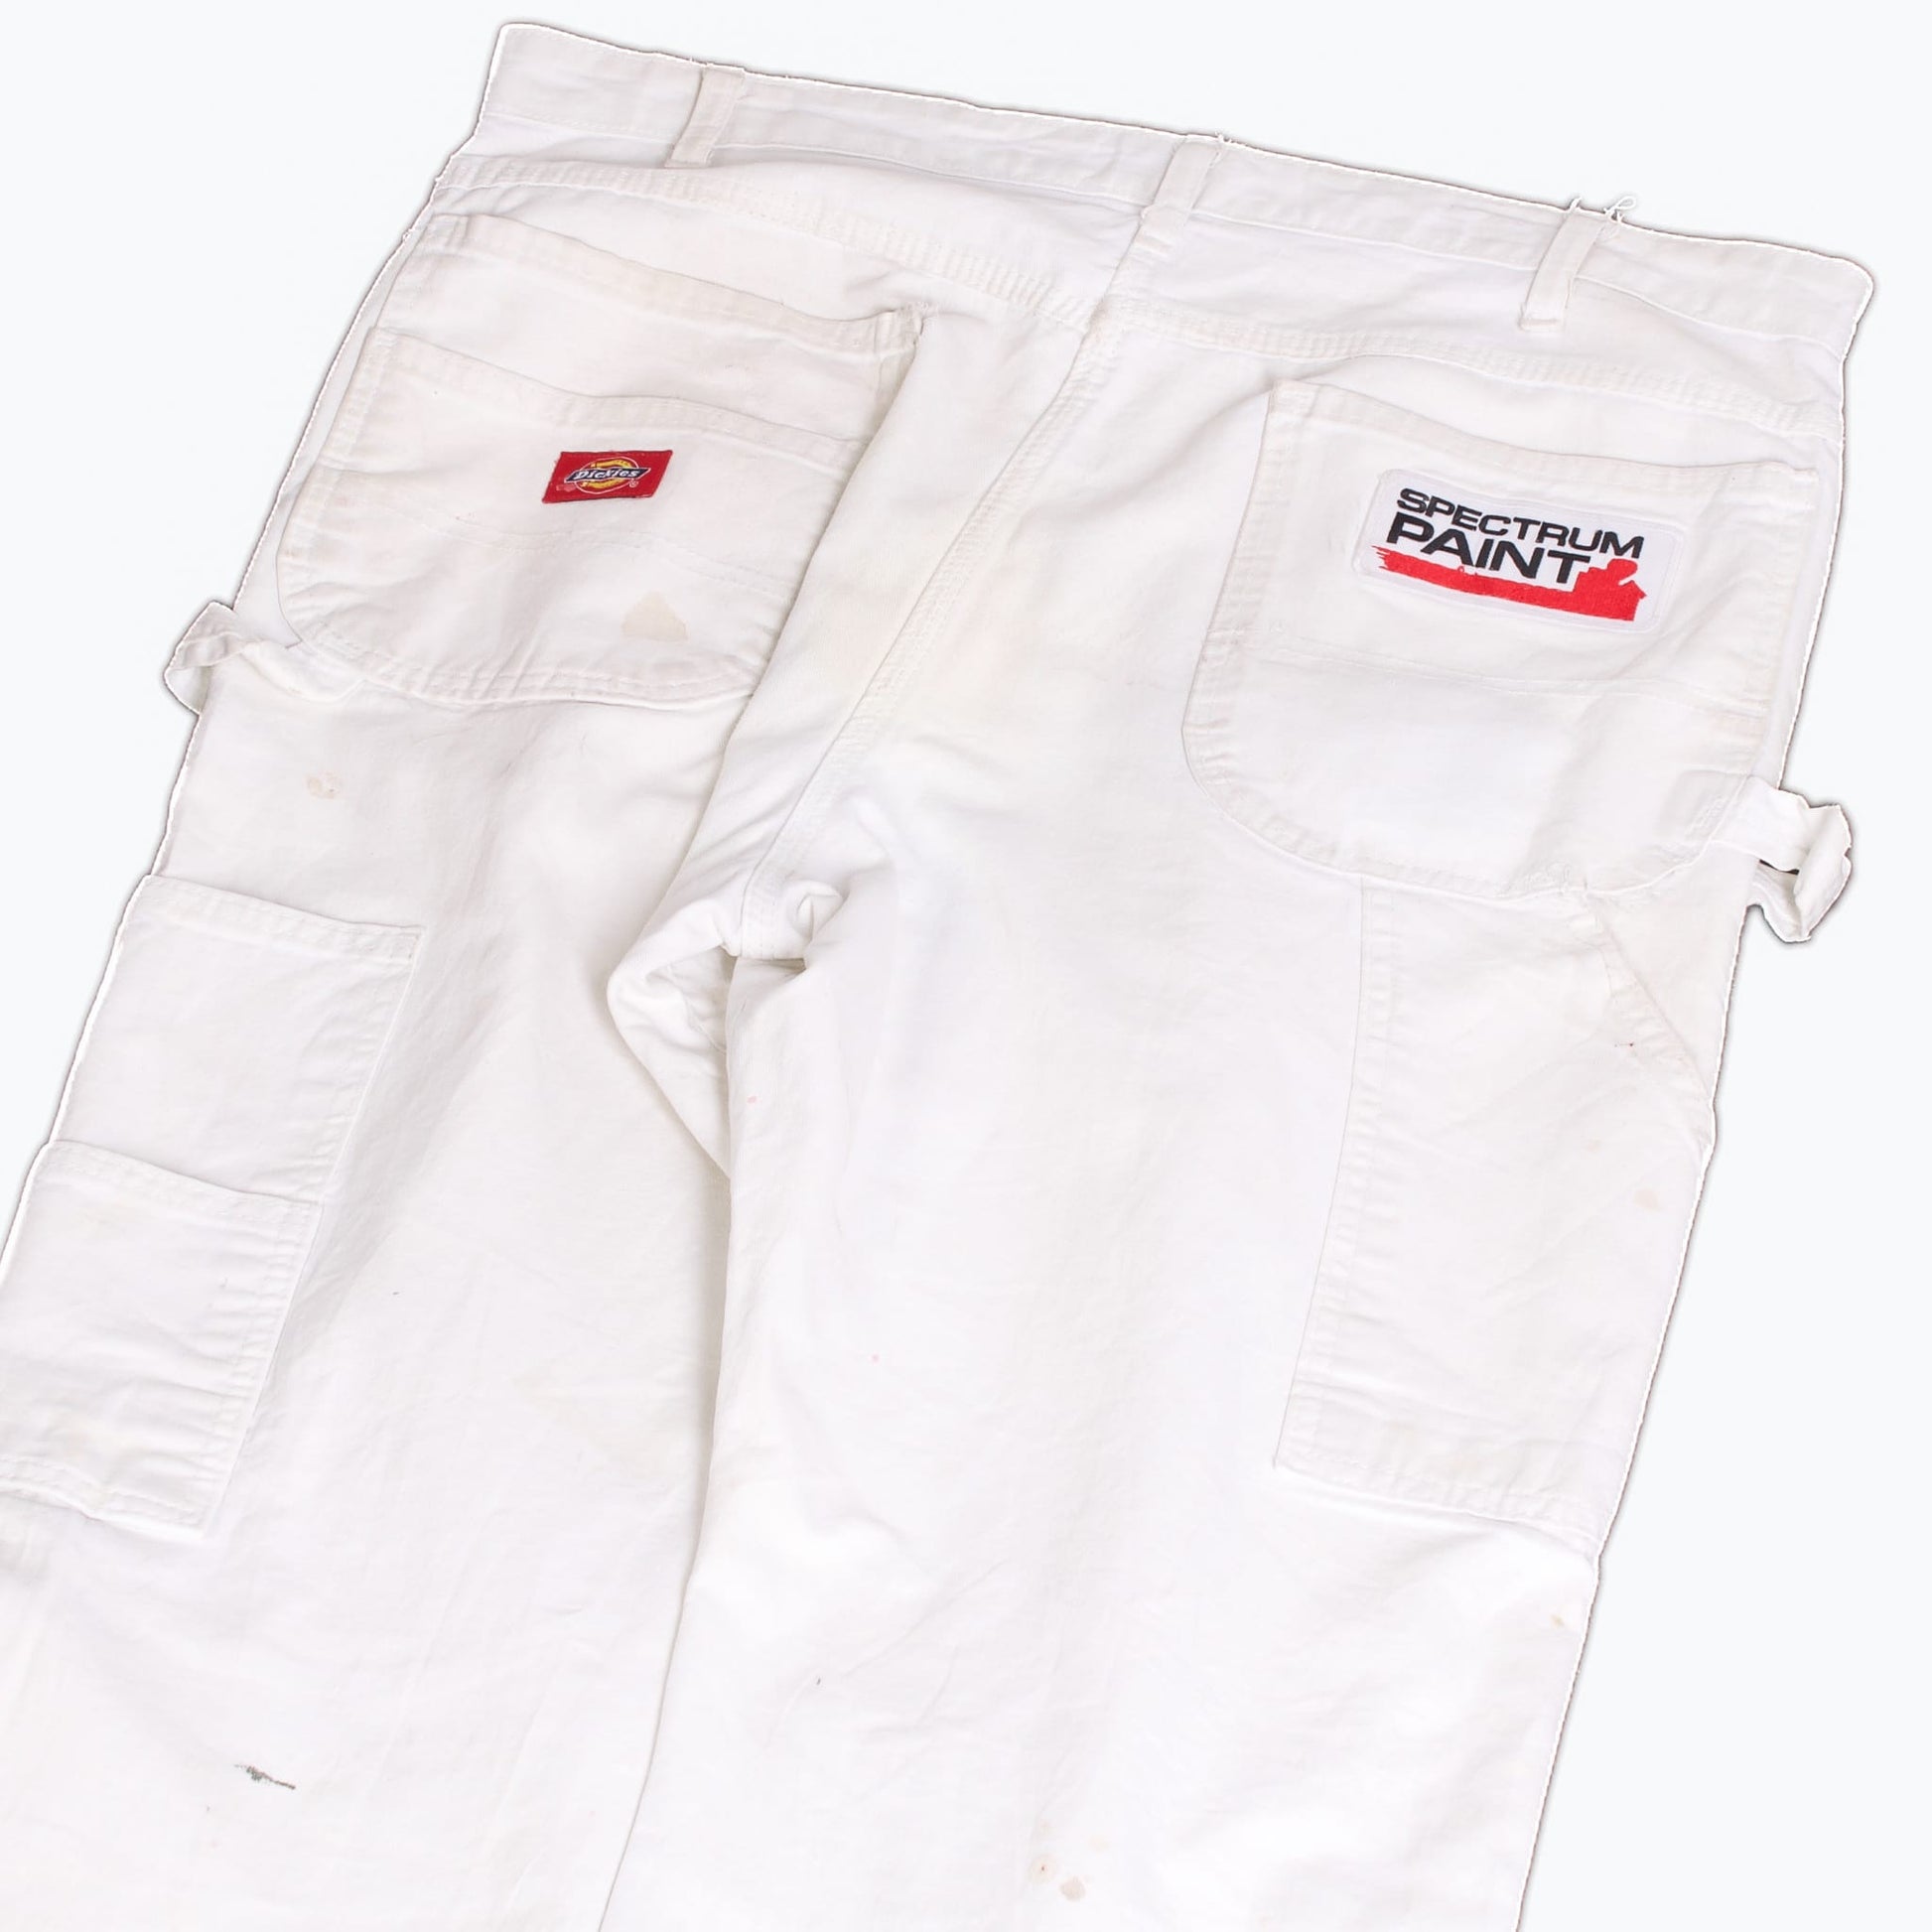 Vintage Dickies Carpenter Pants - White - 36/30 - American Madness